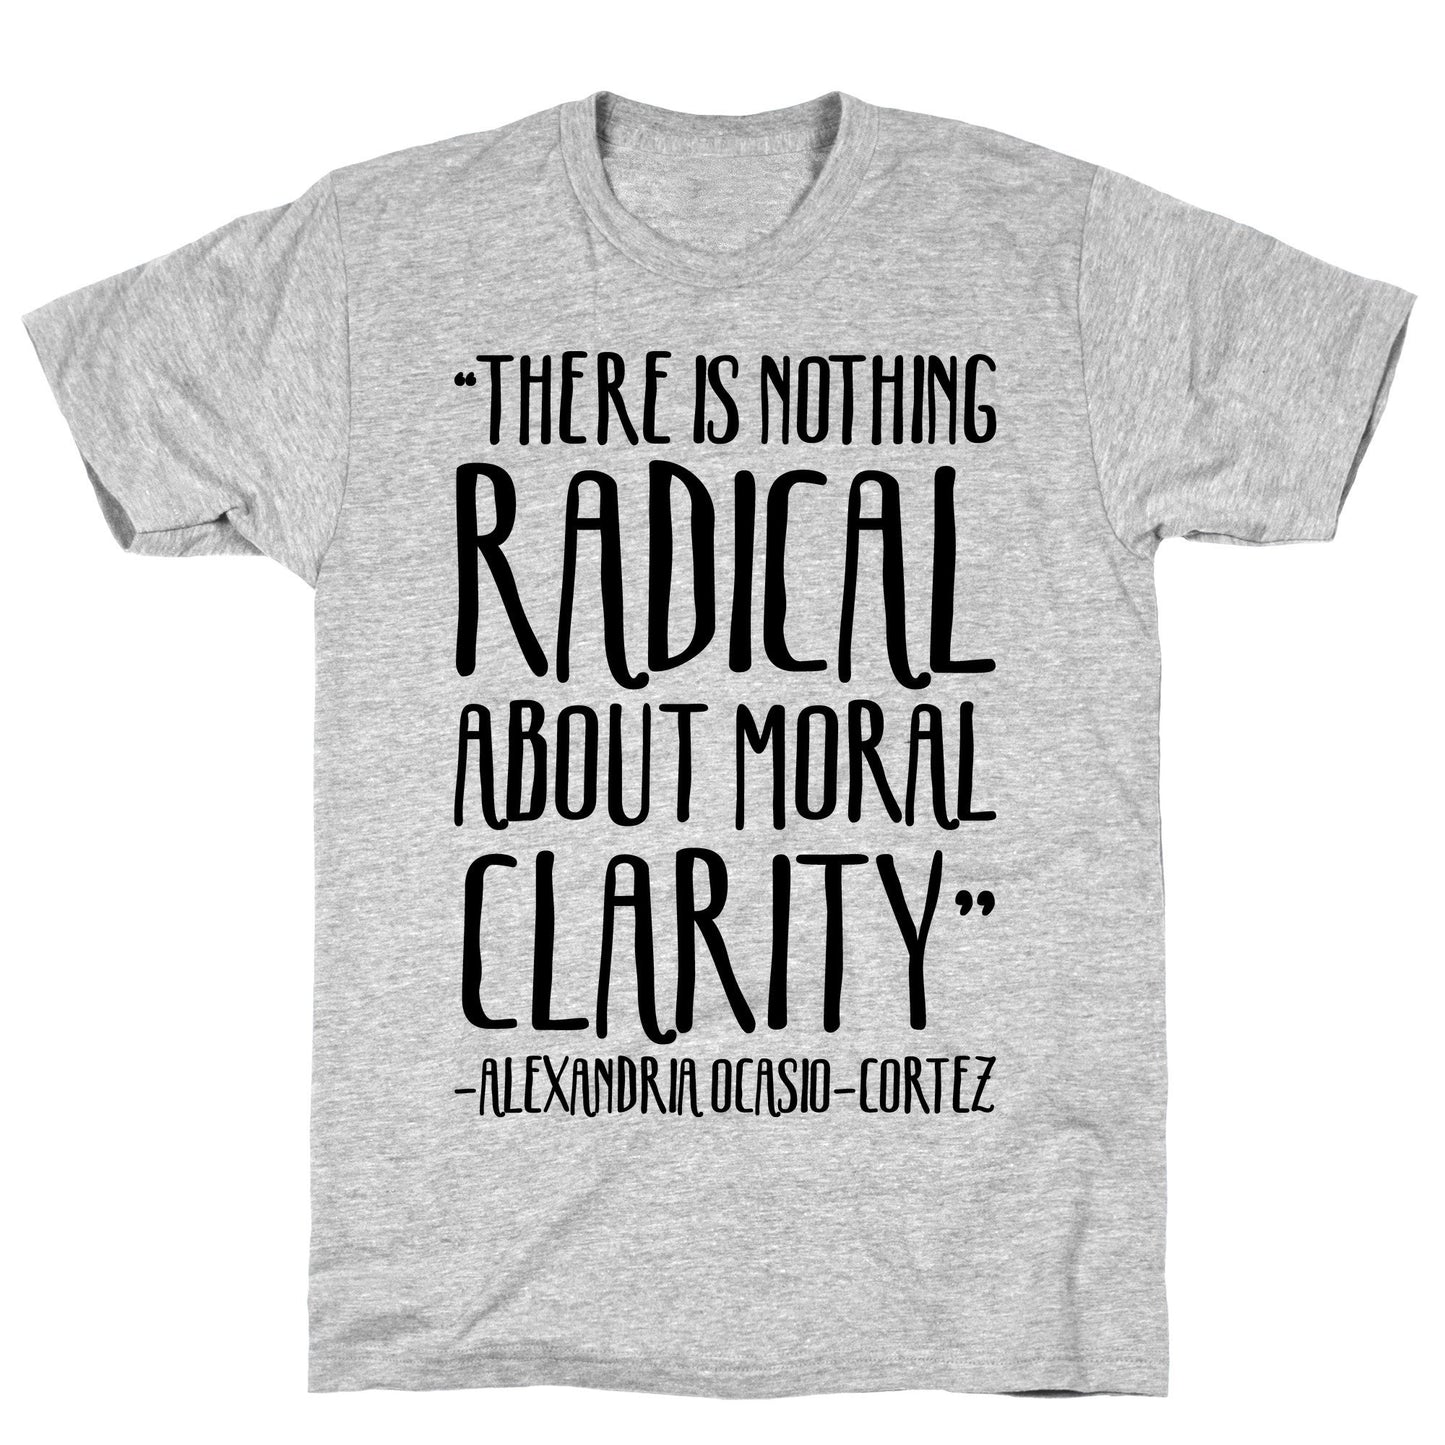 There Is Nothing Radical About Moral Clarity Alexandria Ocasio-Cortez Athletic Gray Unisex Cotton Tee